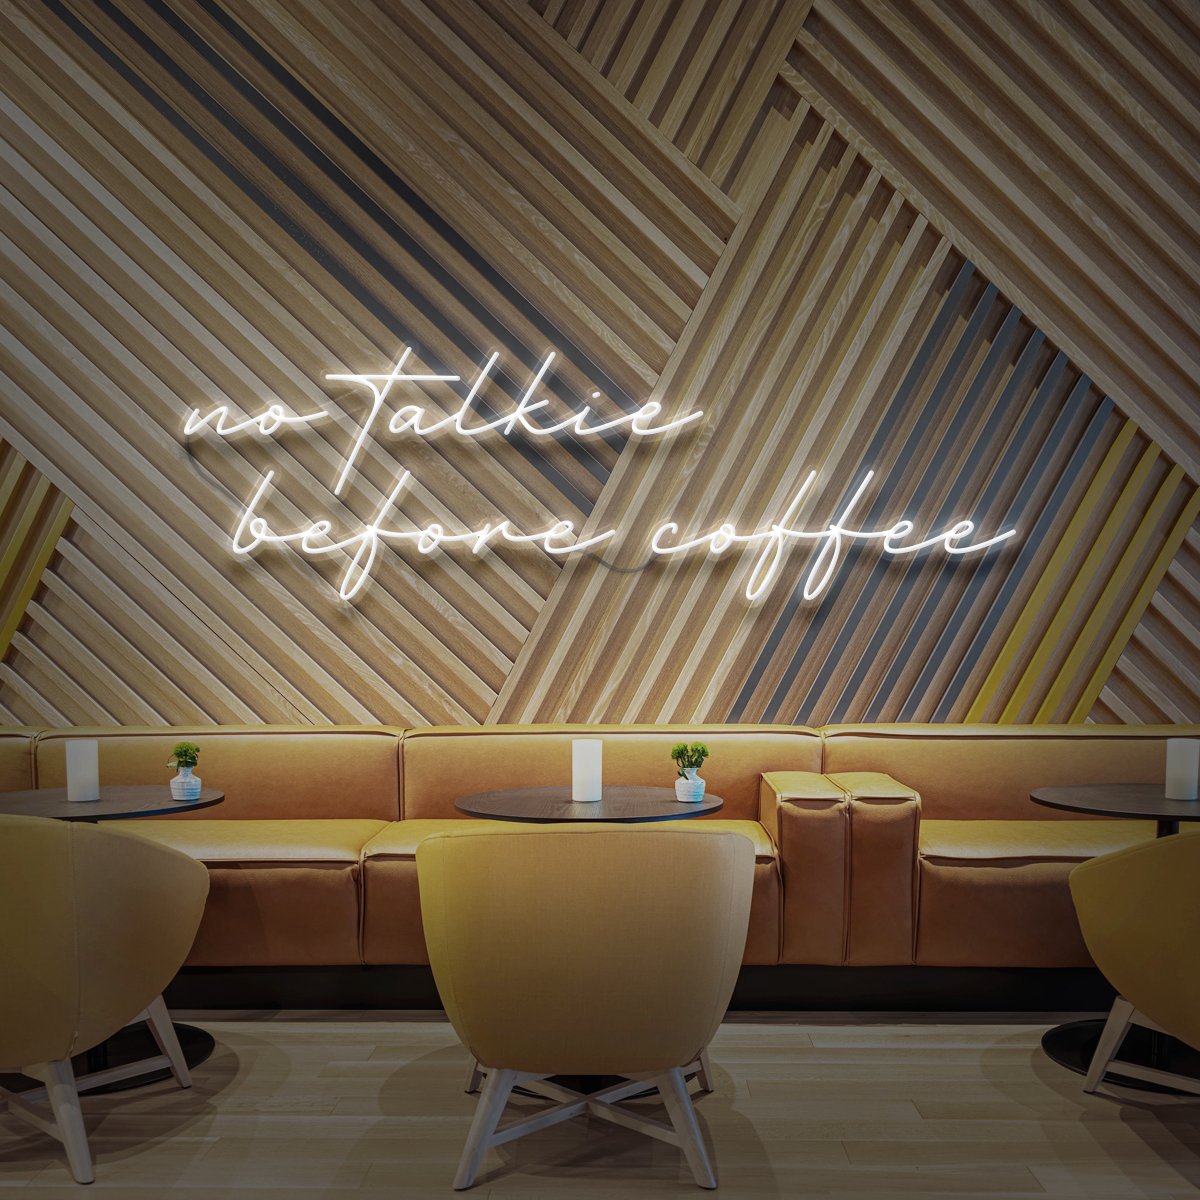 "No Talkie Before Coffee" Neon Sign for Cafés 90cm (3ft) / White / LED Neon by Neon Icons